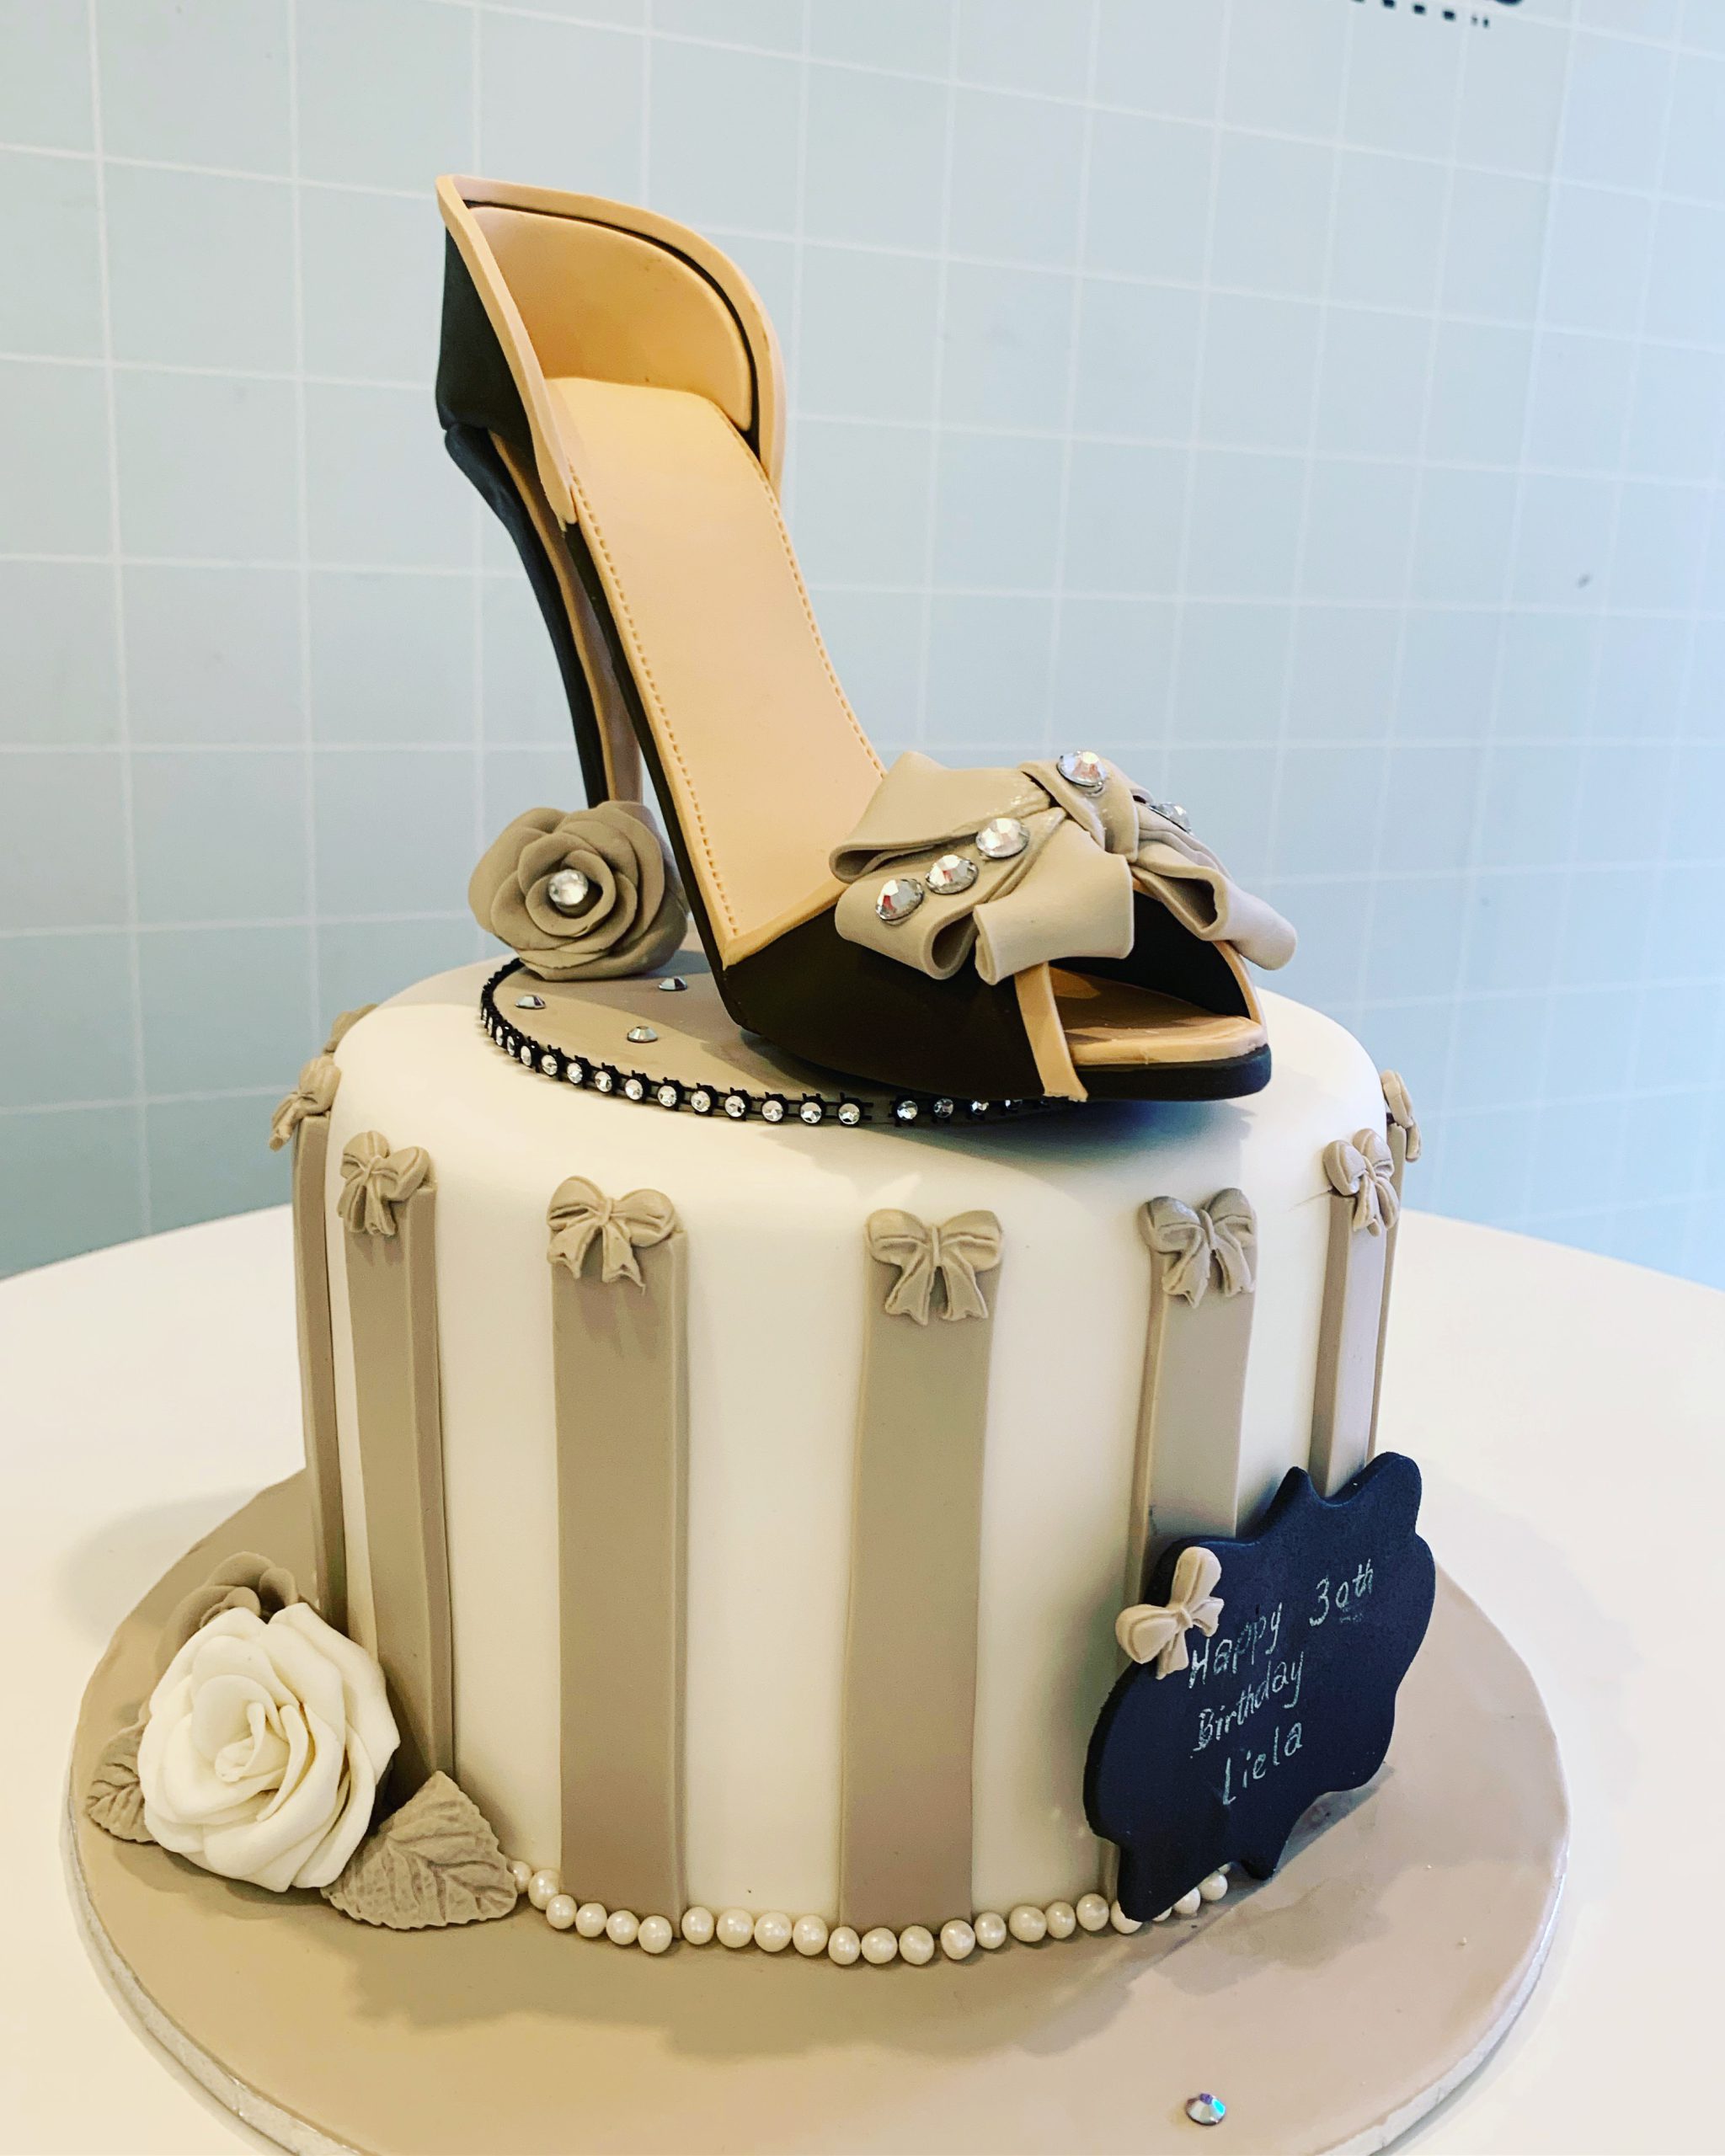 18th Birthday Louboutin Cake | An 18th Birthday Cake for the… | Flickr